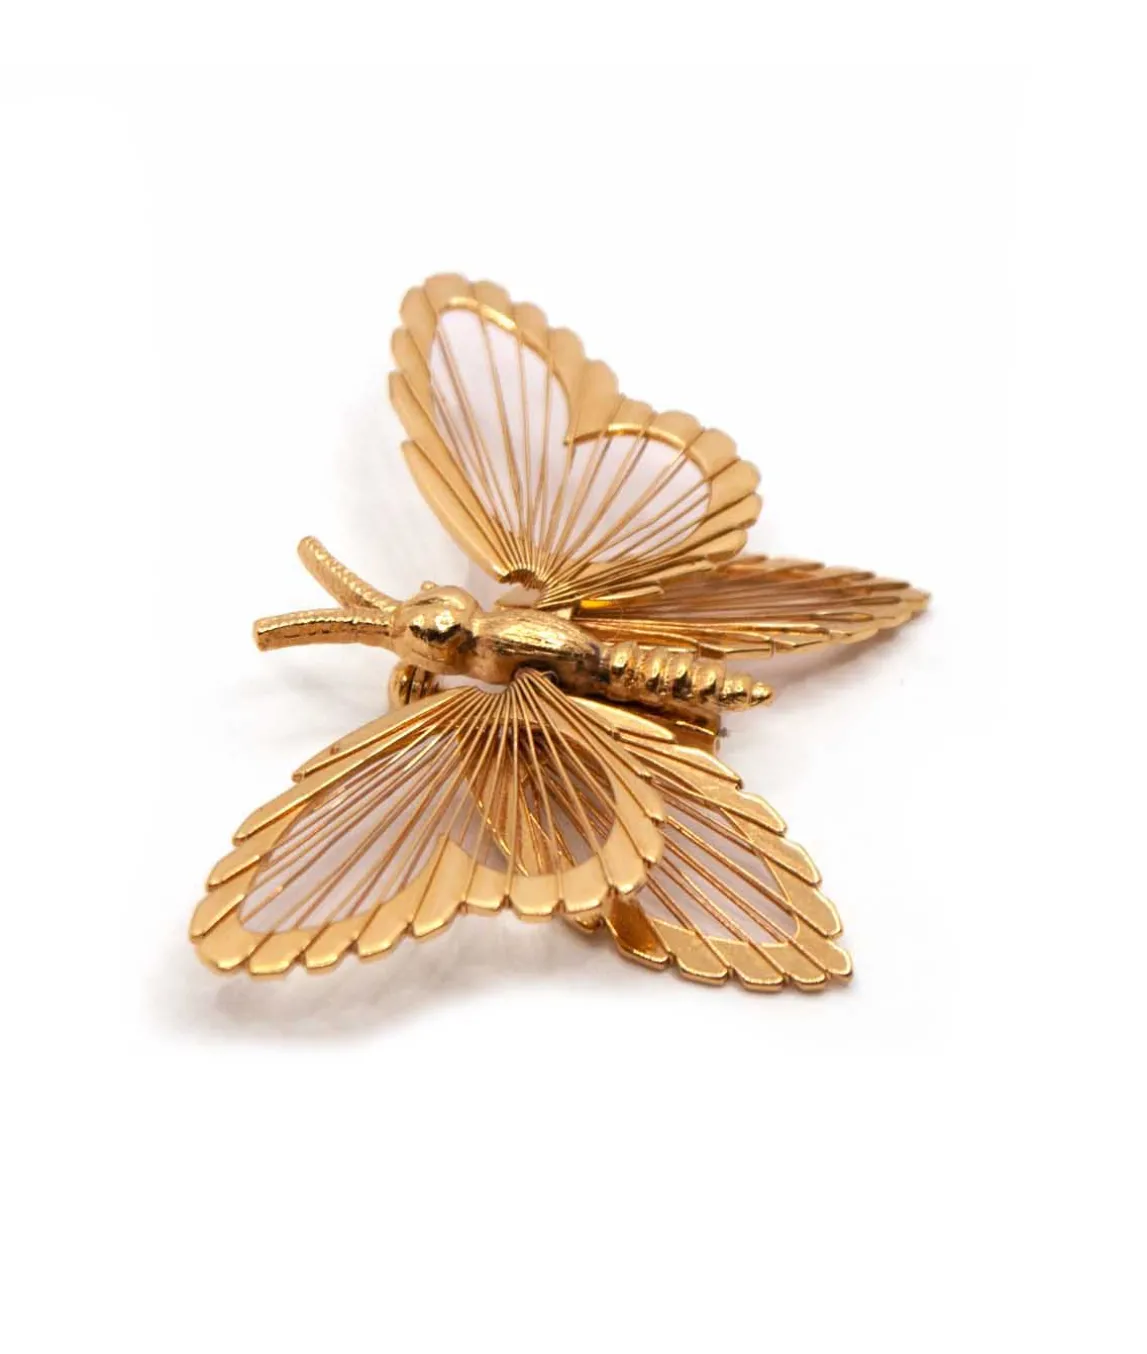 Top left view of Monet Menagerie butterfly brooch pin gold tone with wire wings